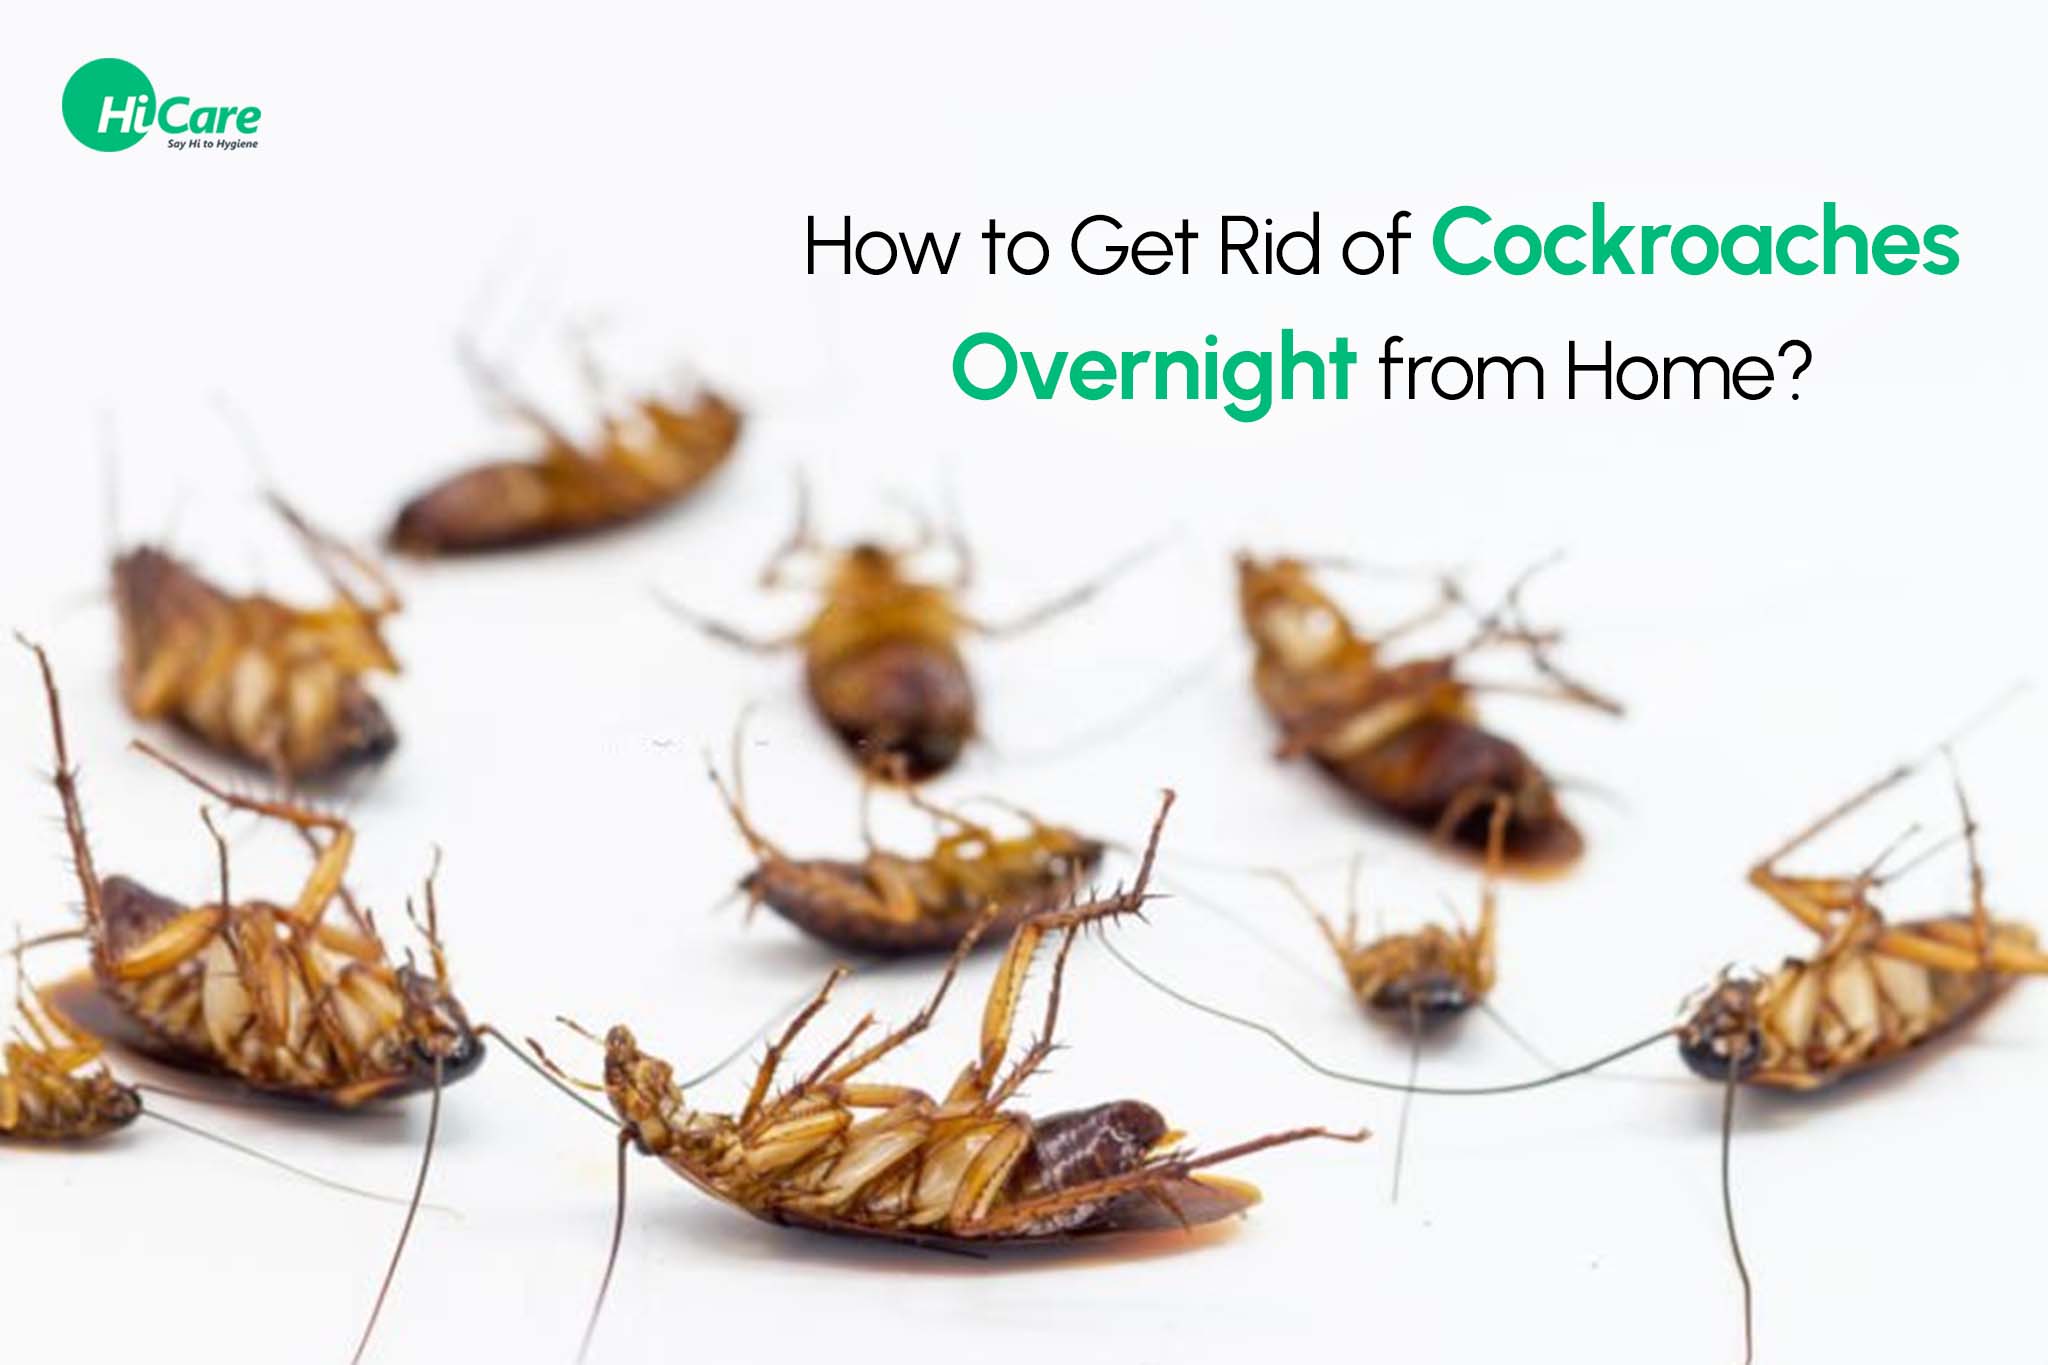 how to get rid of cockroaches in the home